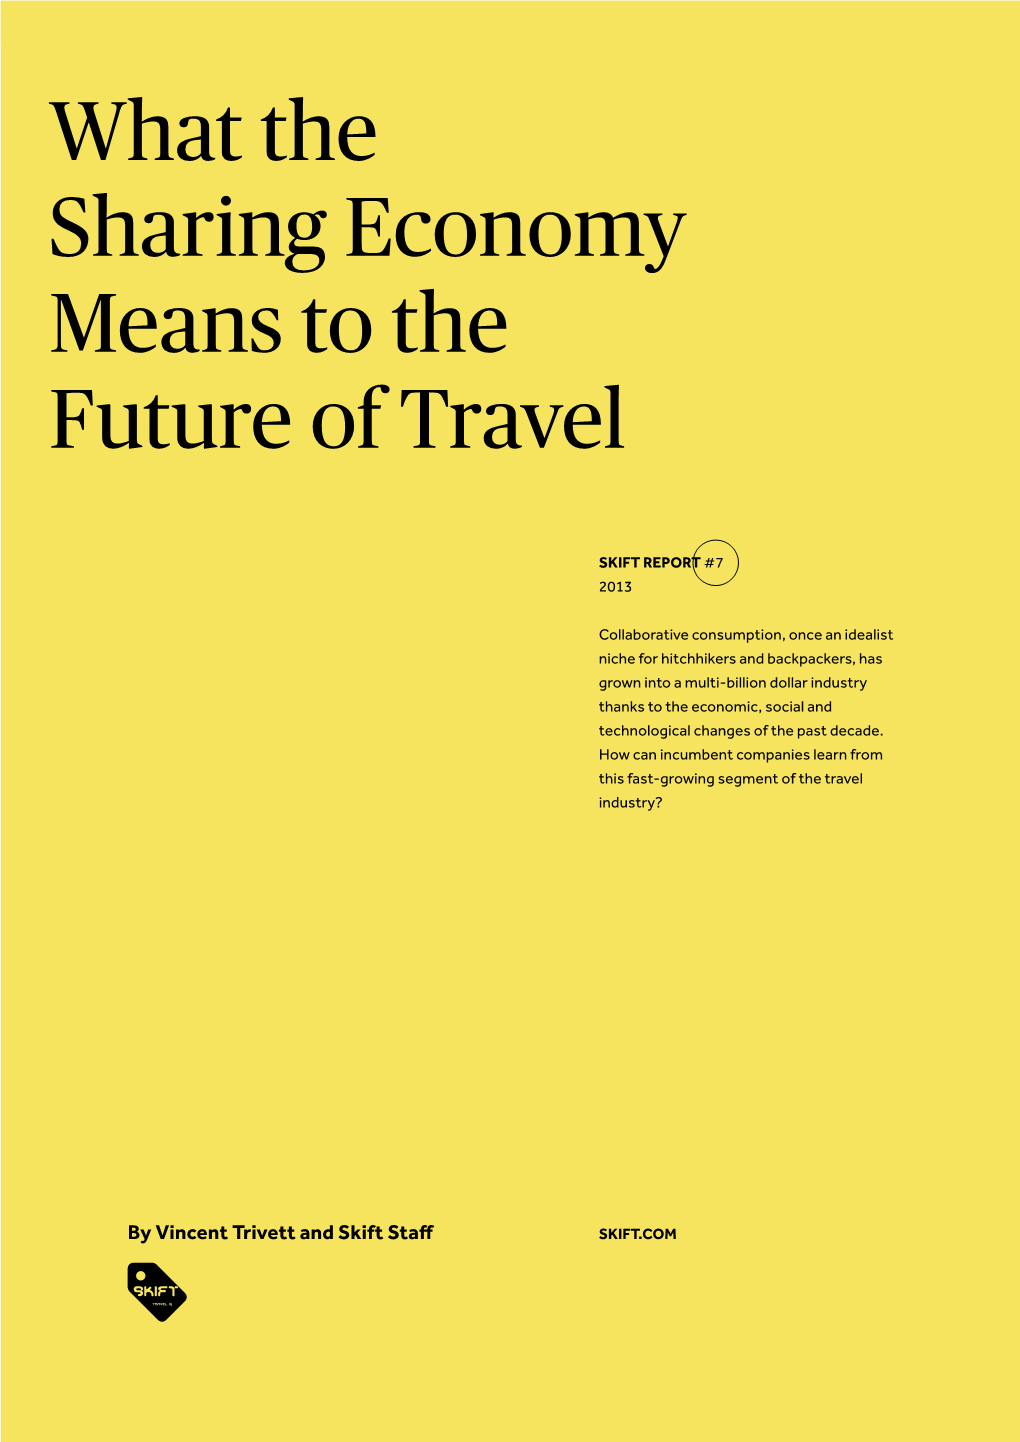 What the Sharing Economy Means to the Future of Travel